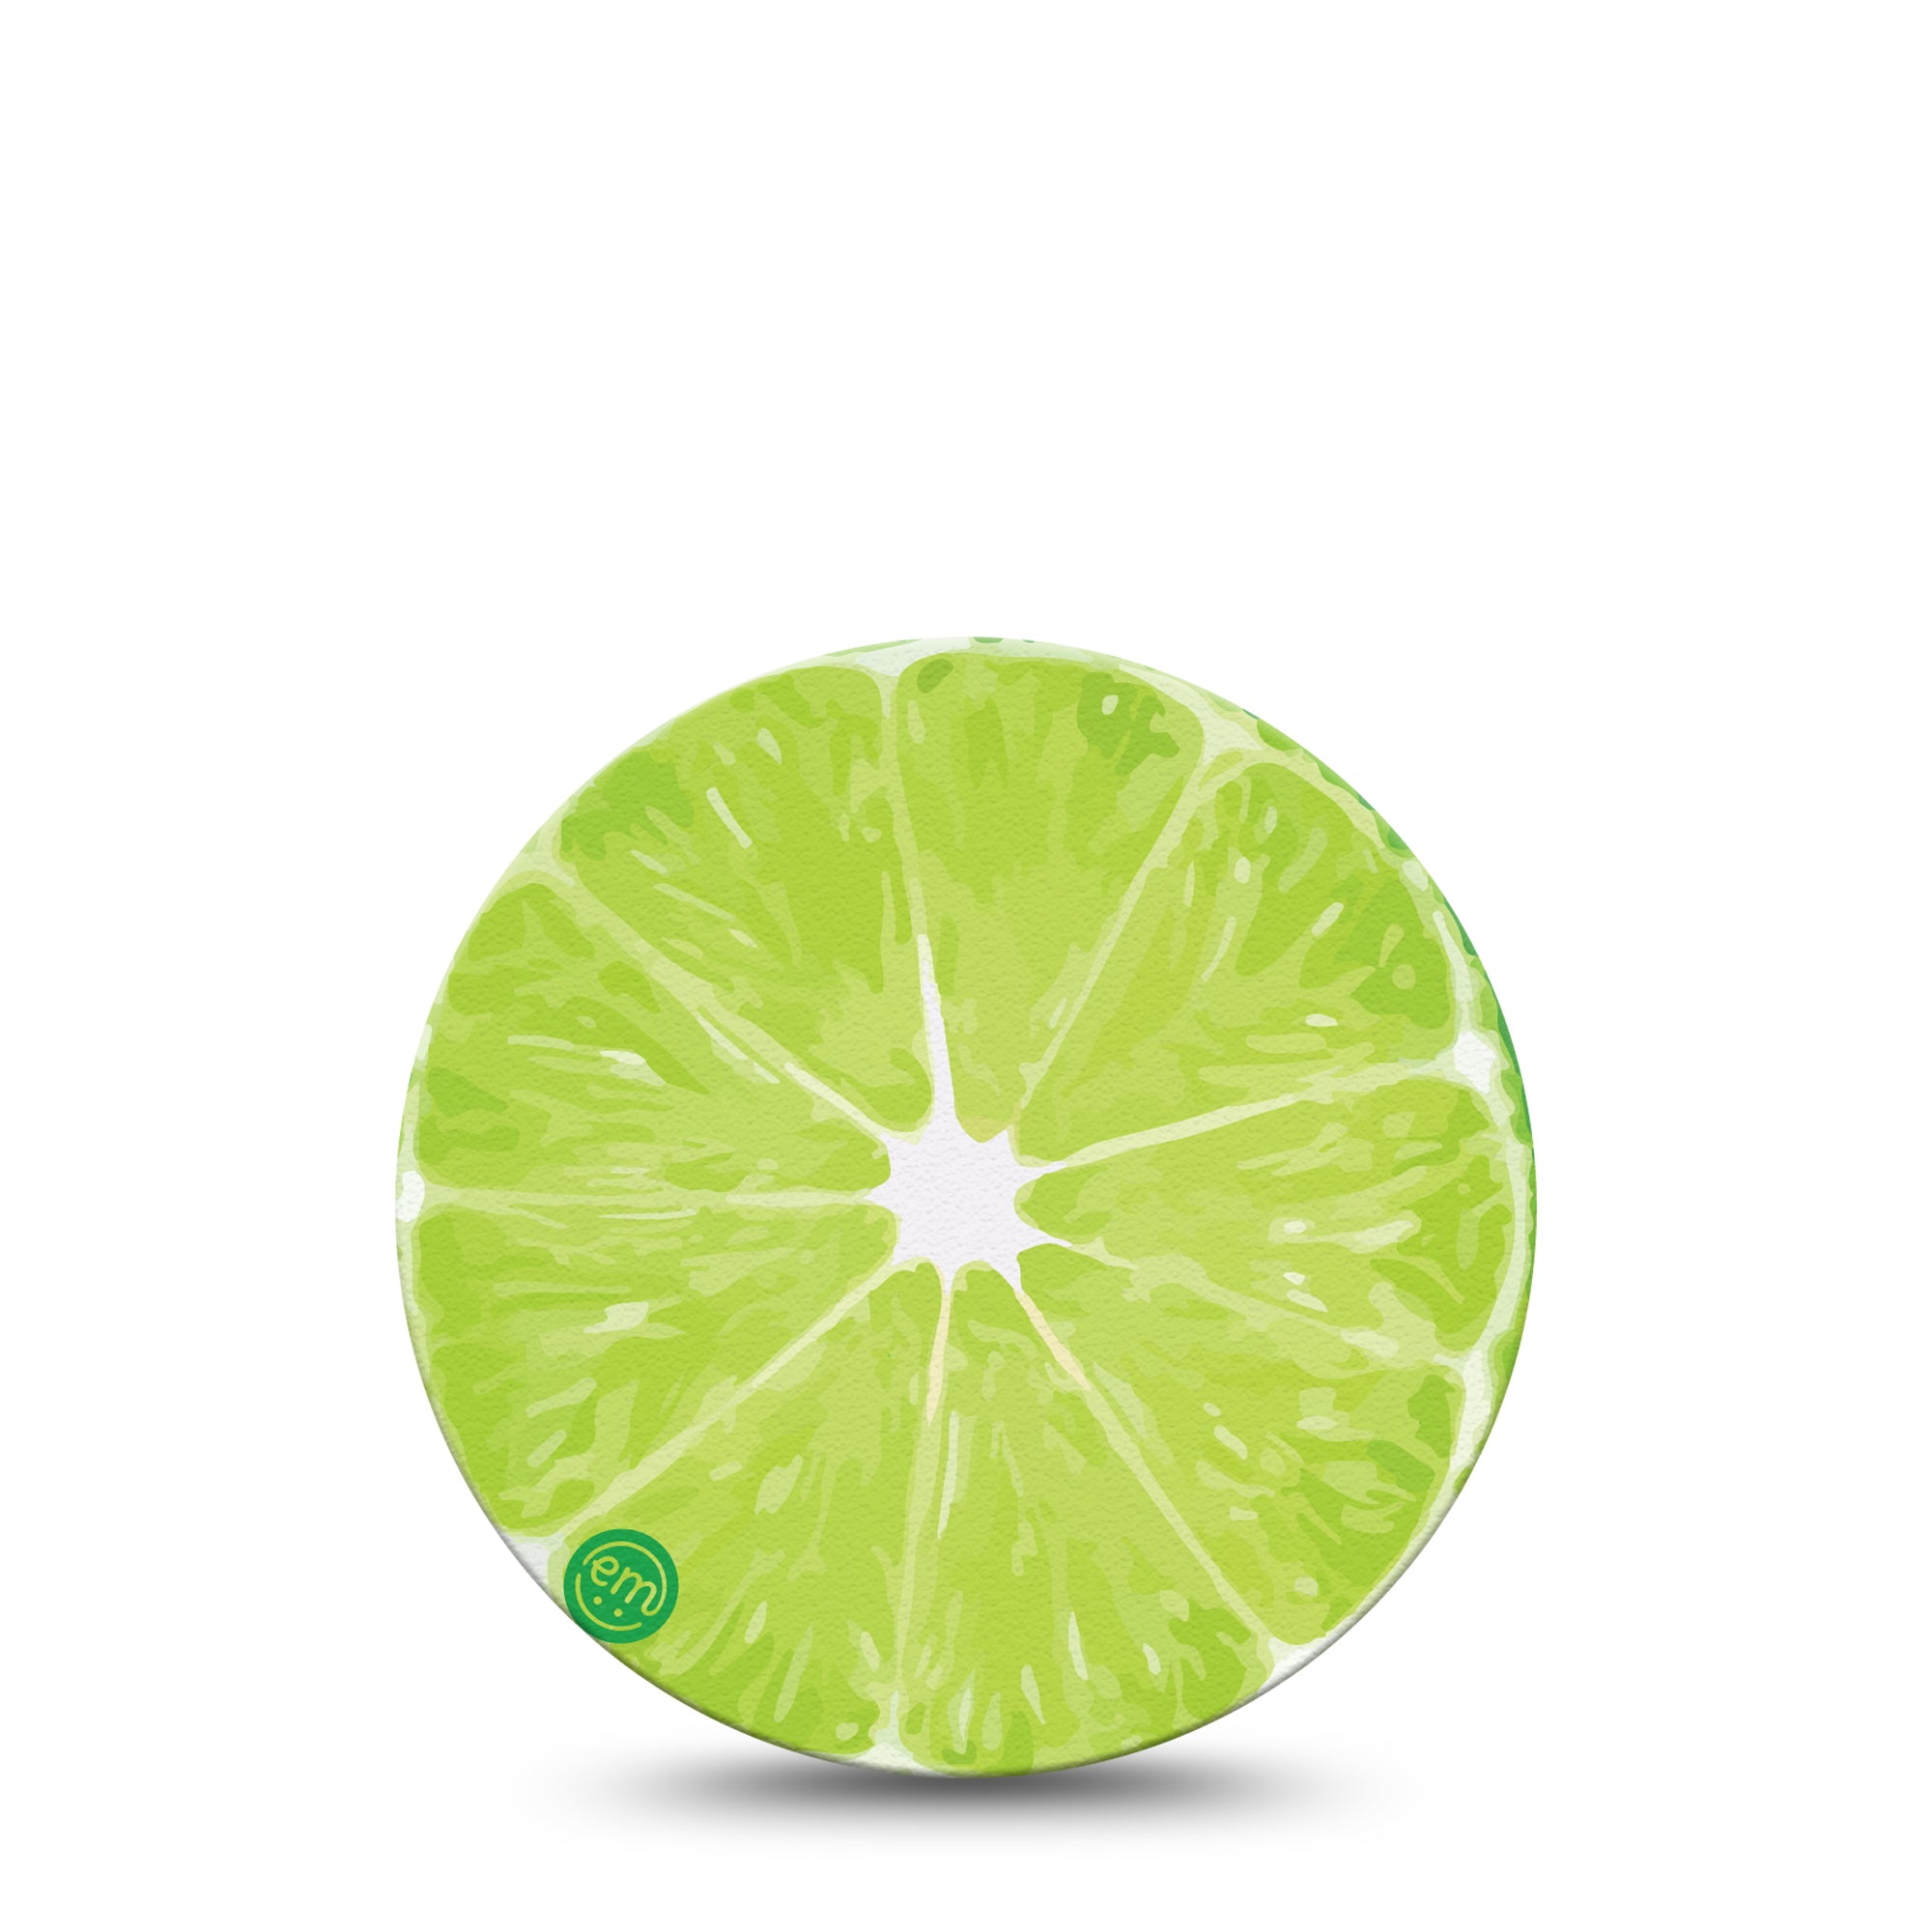 ExpressionMed Lime Libre 3 Overpatch, Single,Citrus Slice Themed, CGM Adhesive Tape Design